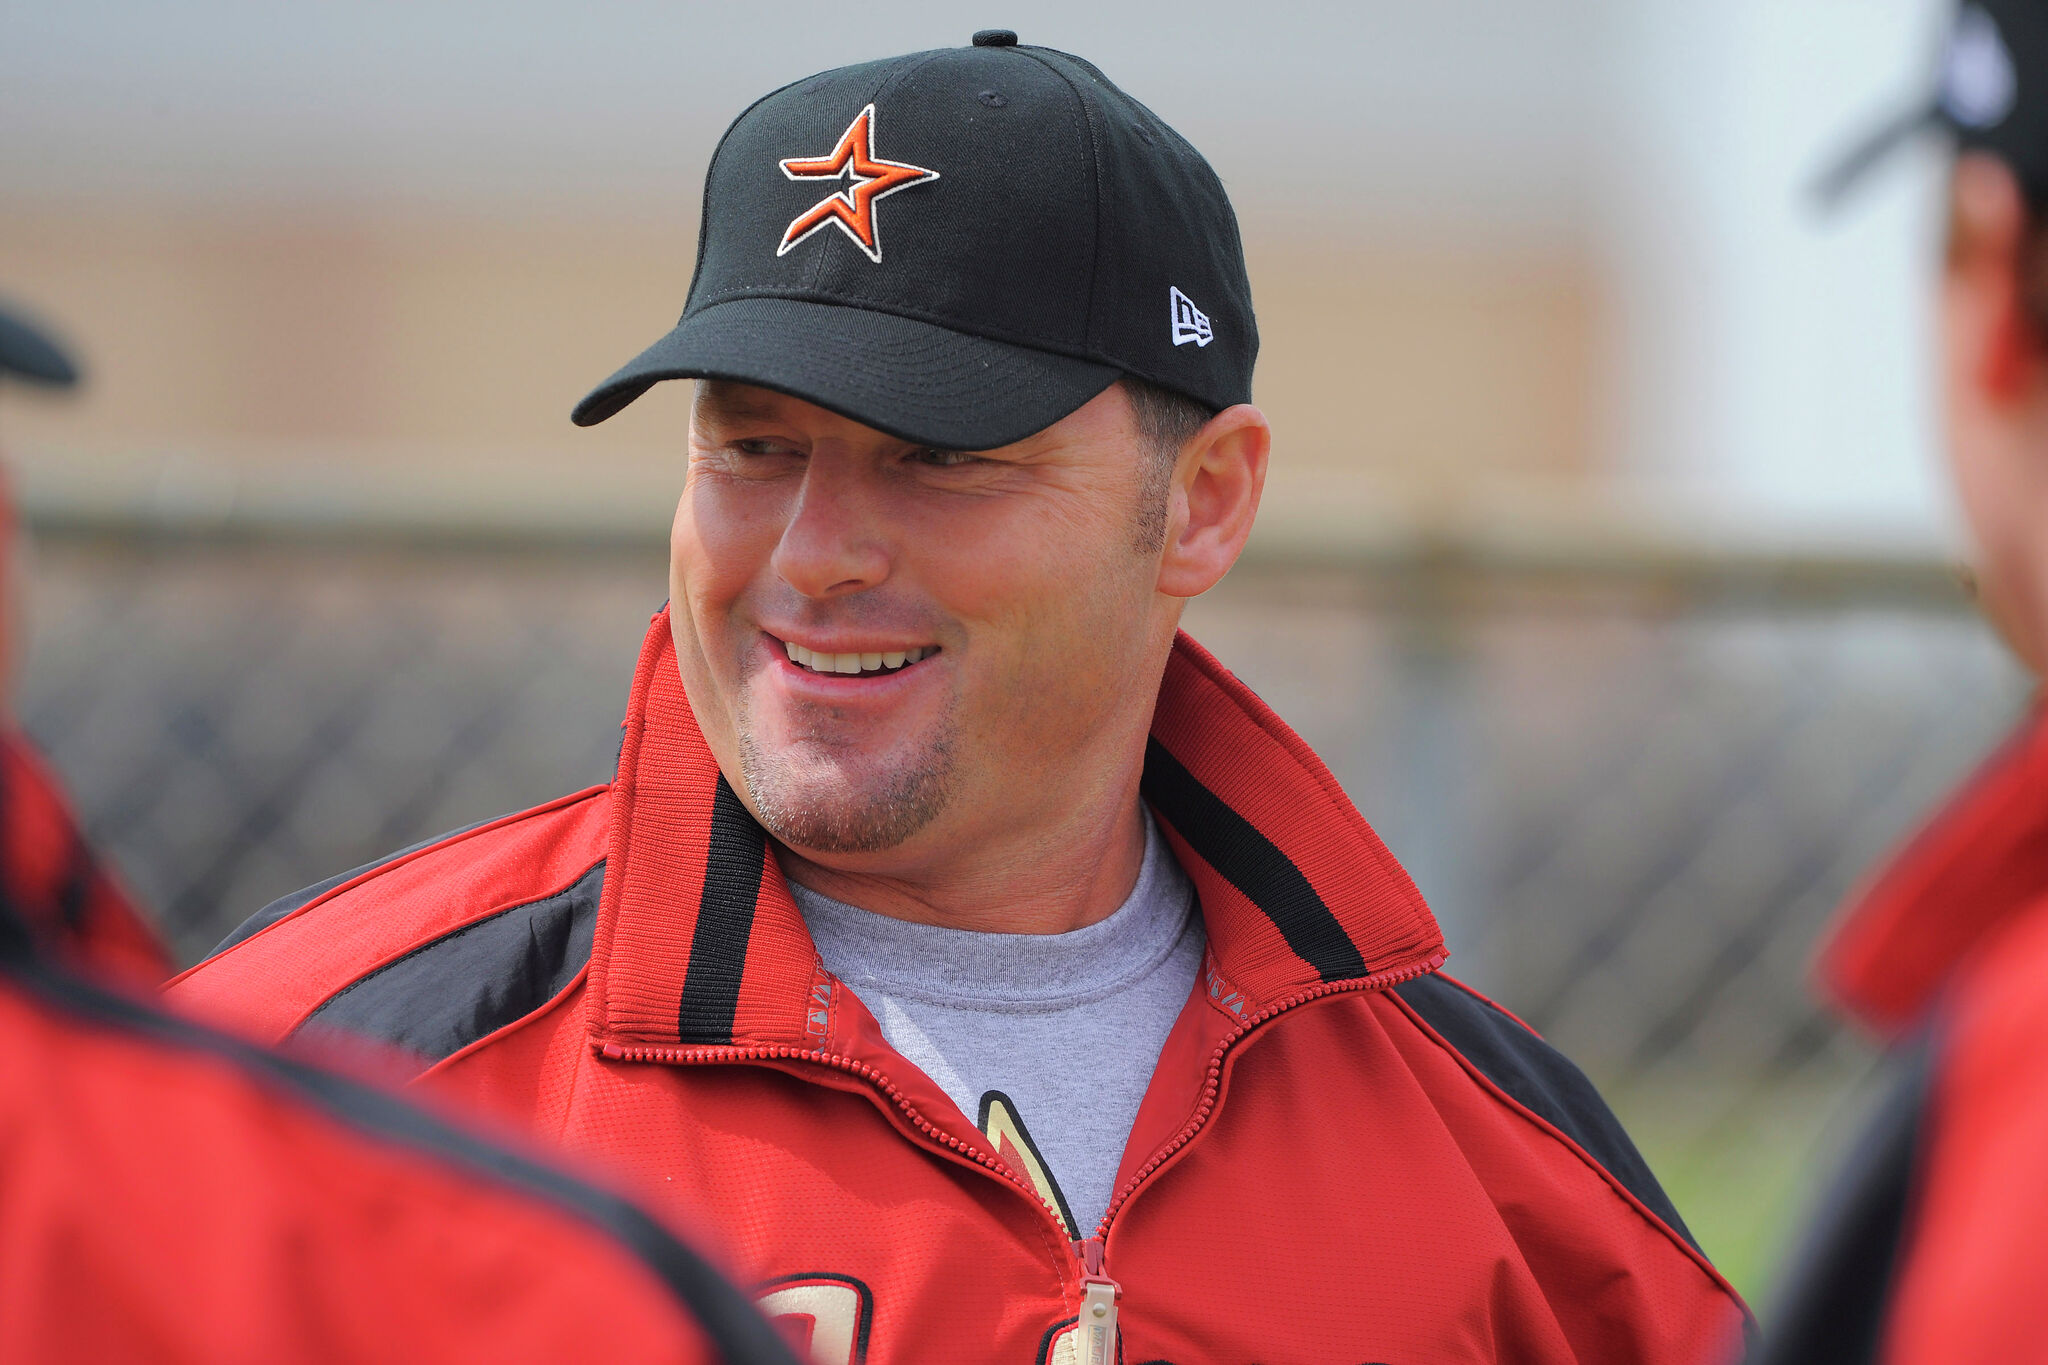 Watch: Astros legend Roger Clemens throws out Game 1 first pitch